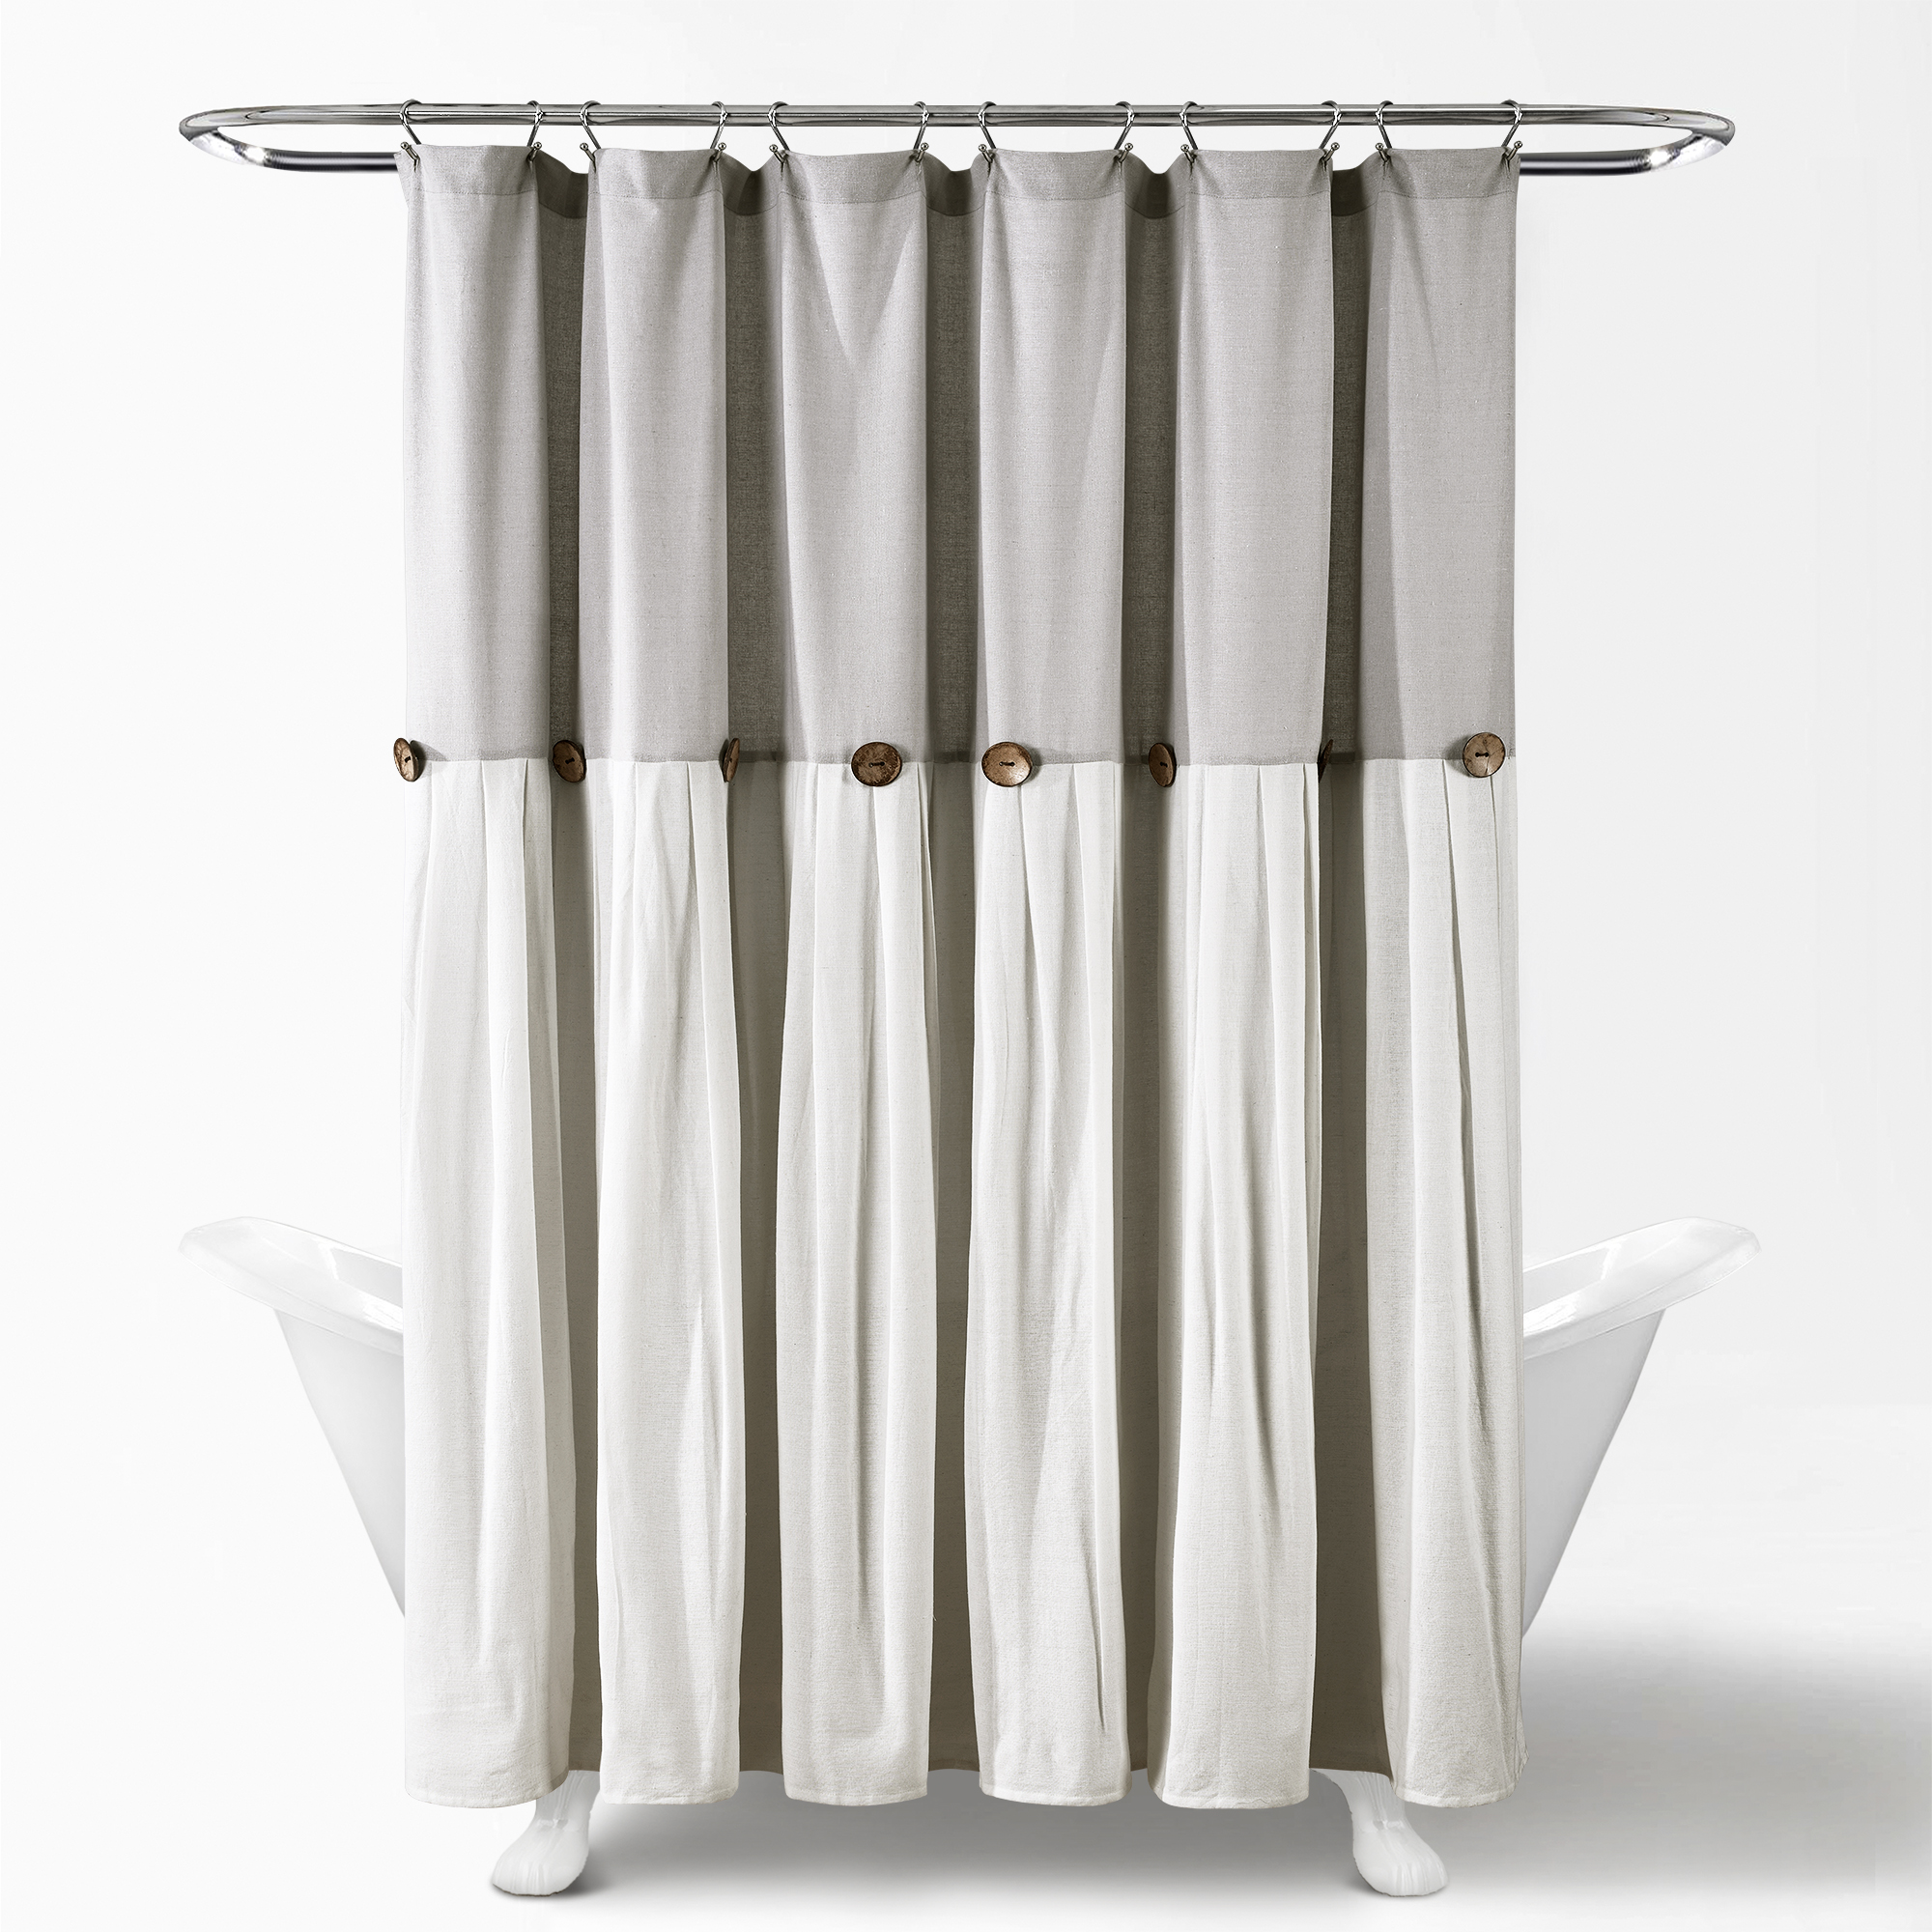 Lush Decor, Gray & White Linen Button Shower Curtain, 72" x 72", 72 in x 72 in (Wide x Long)